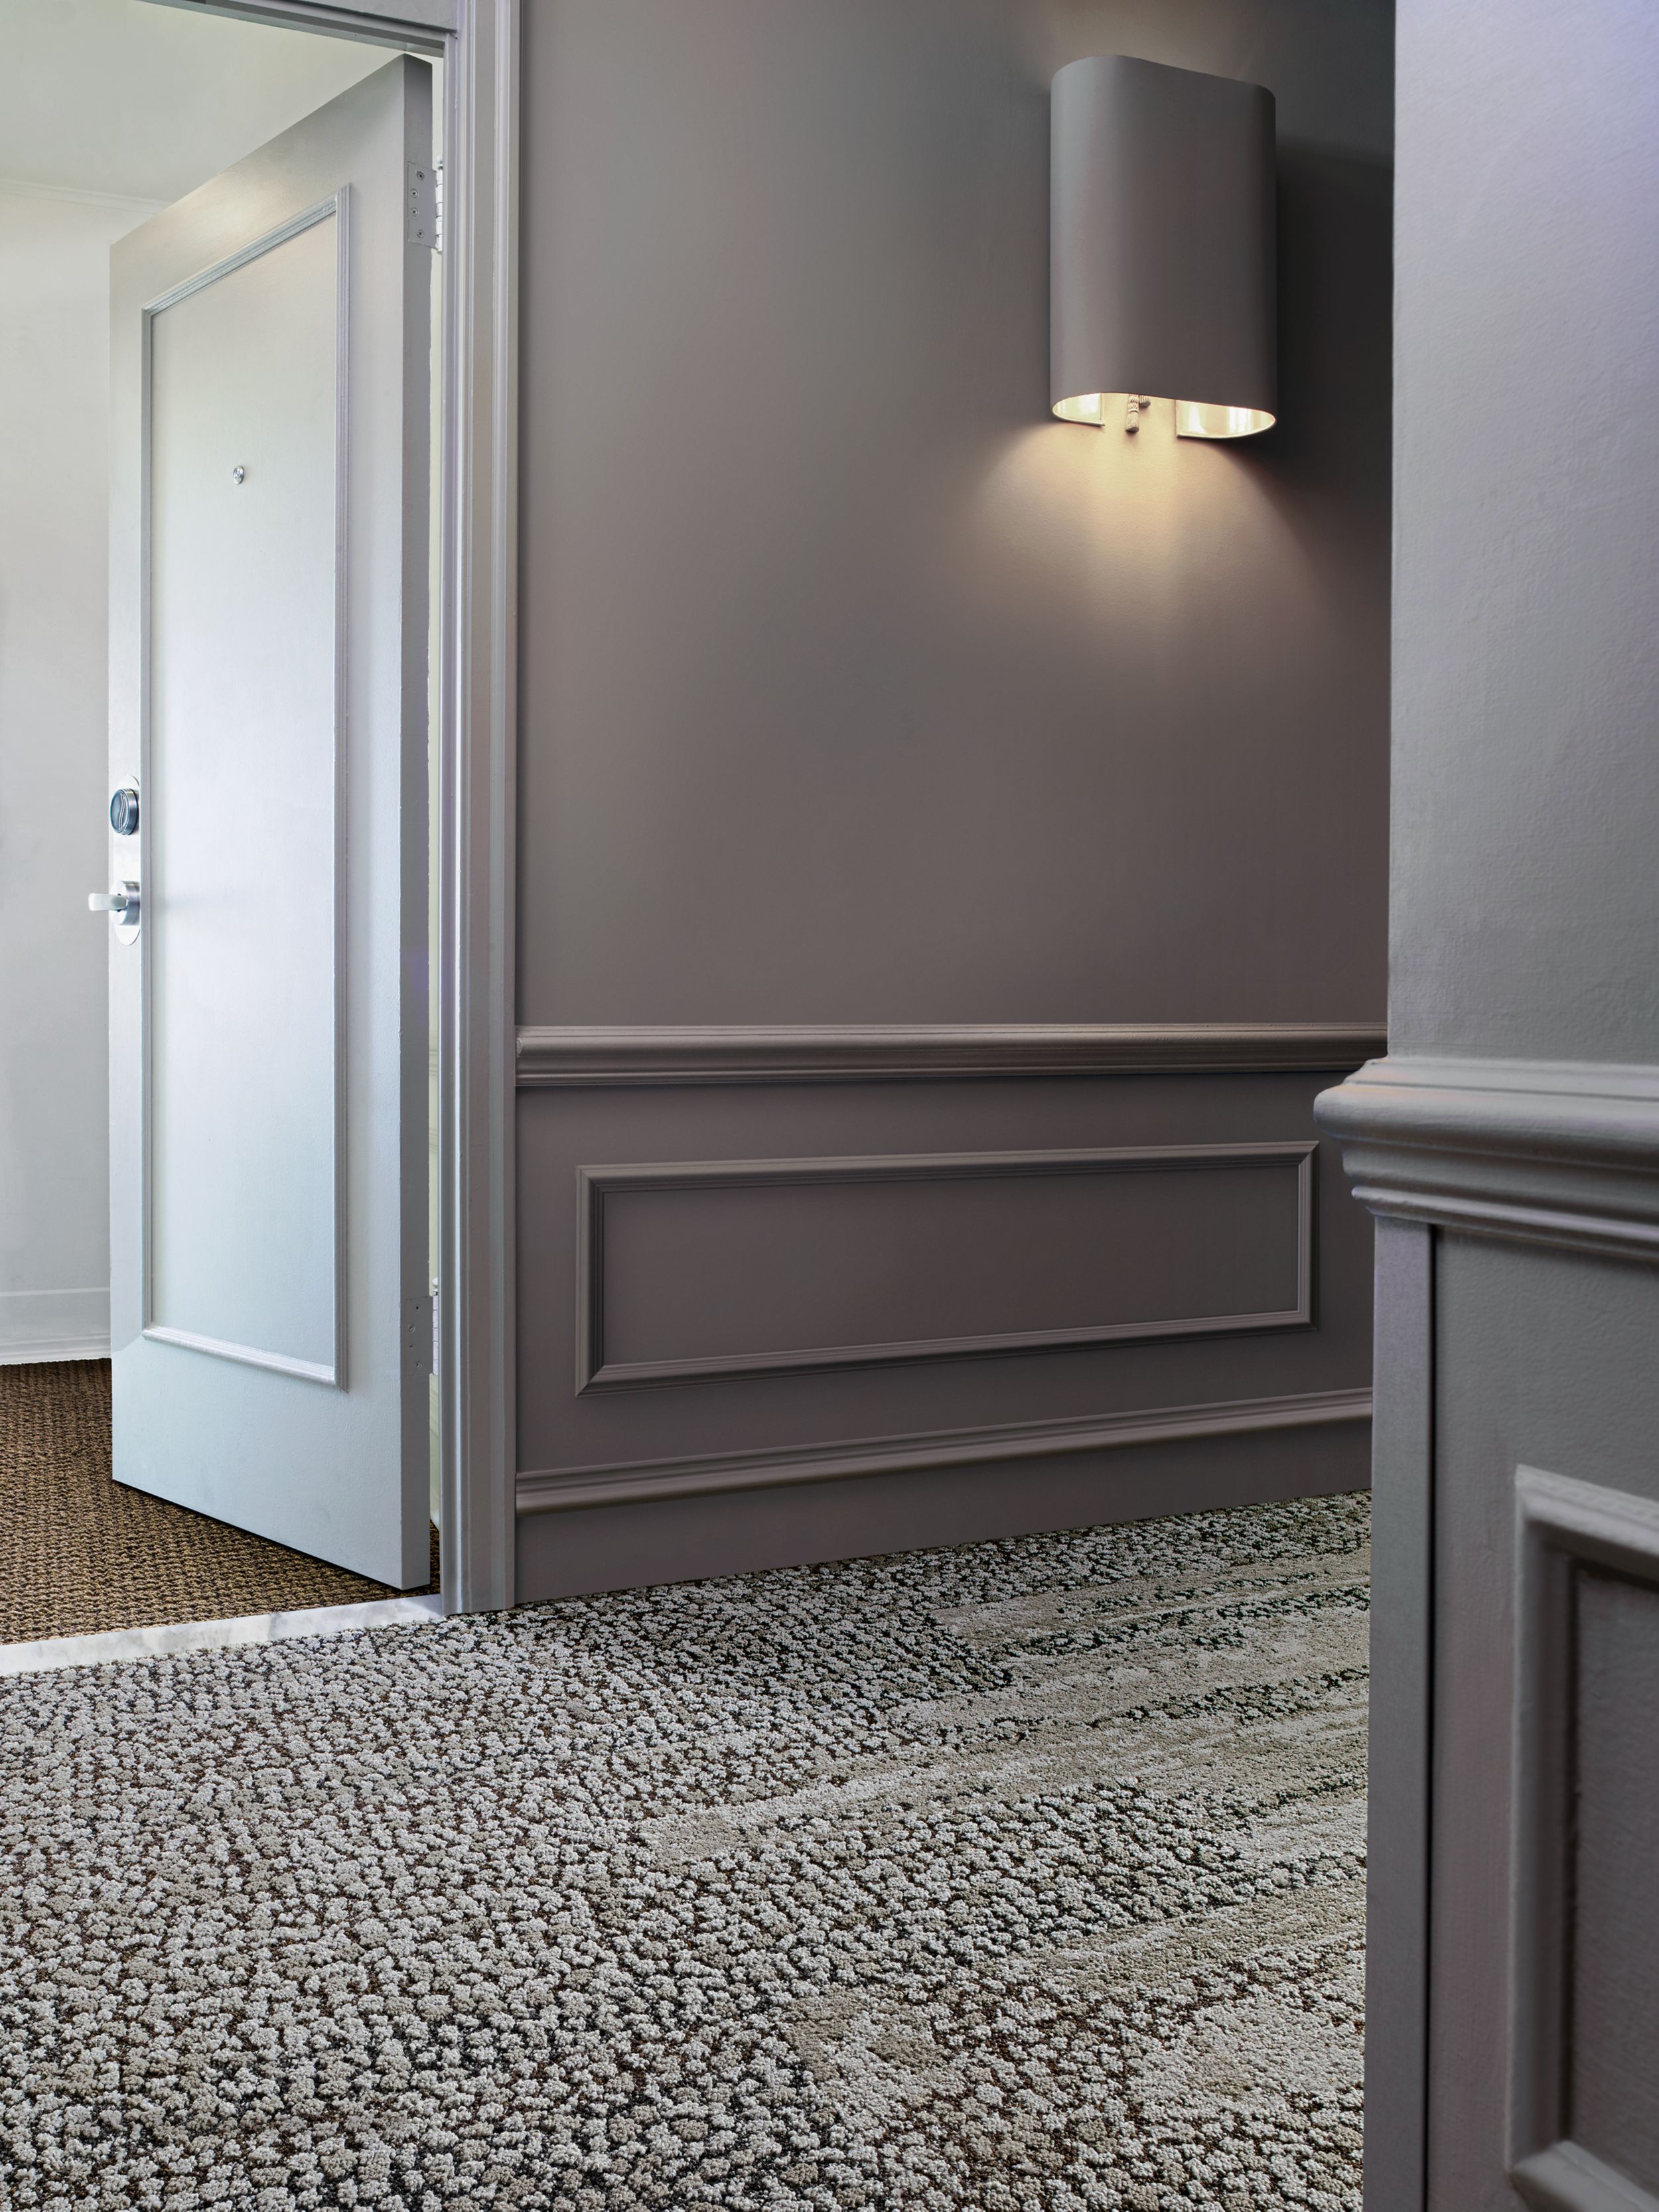 image Interface HN840, HN850 and RMS 607 plank carpet tiles in hotel hallway with hotel room door ajar numéro 8